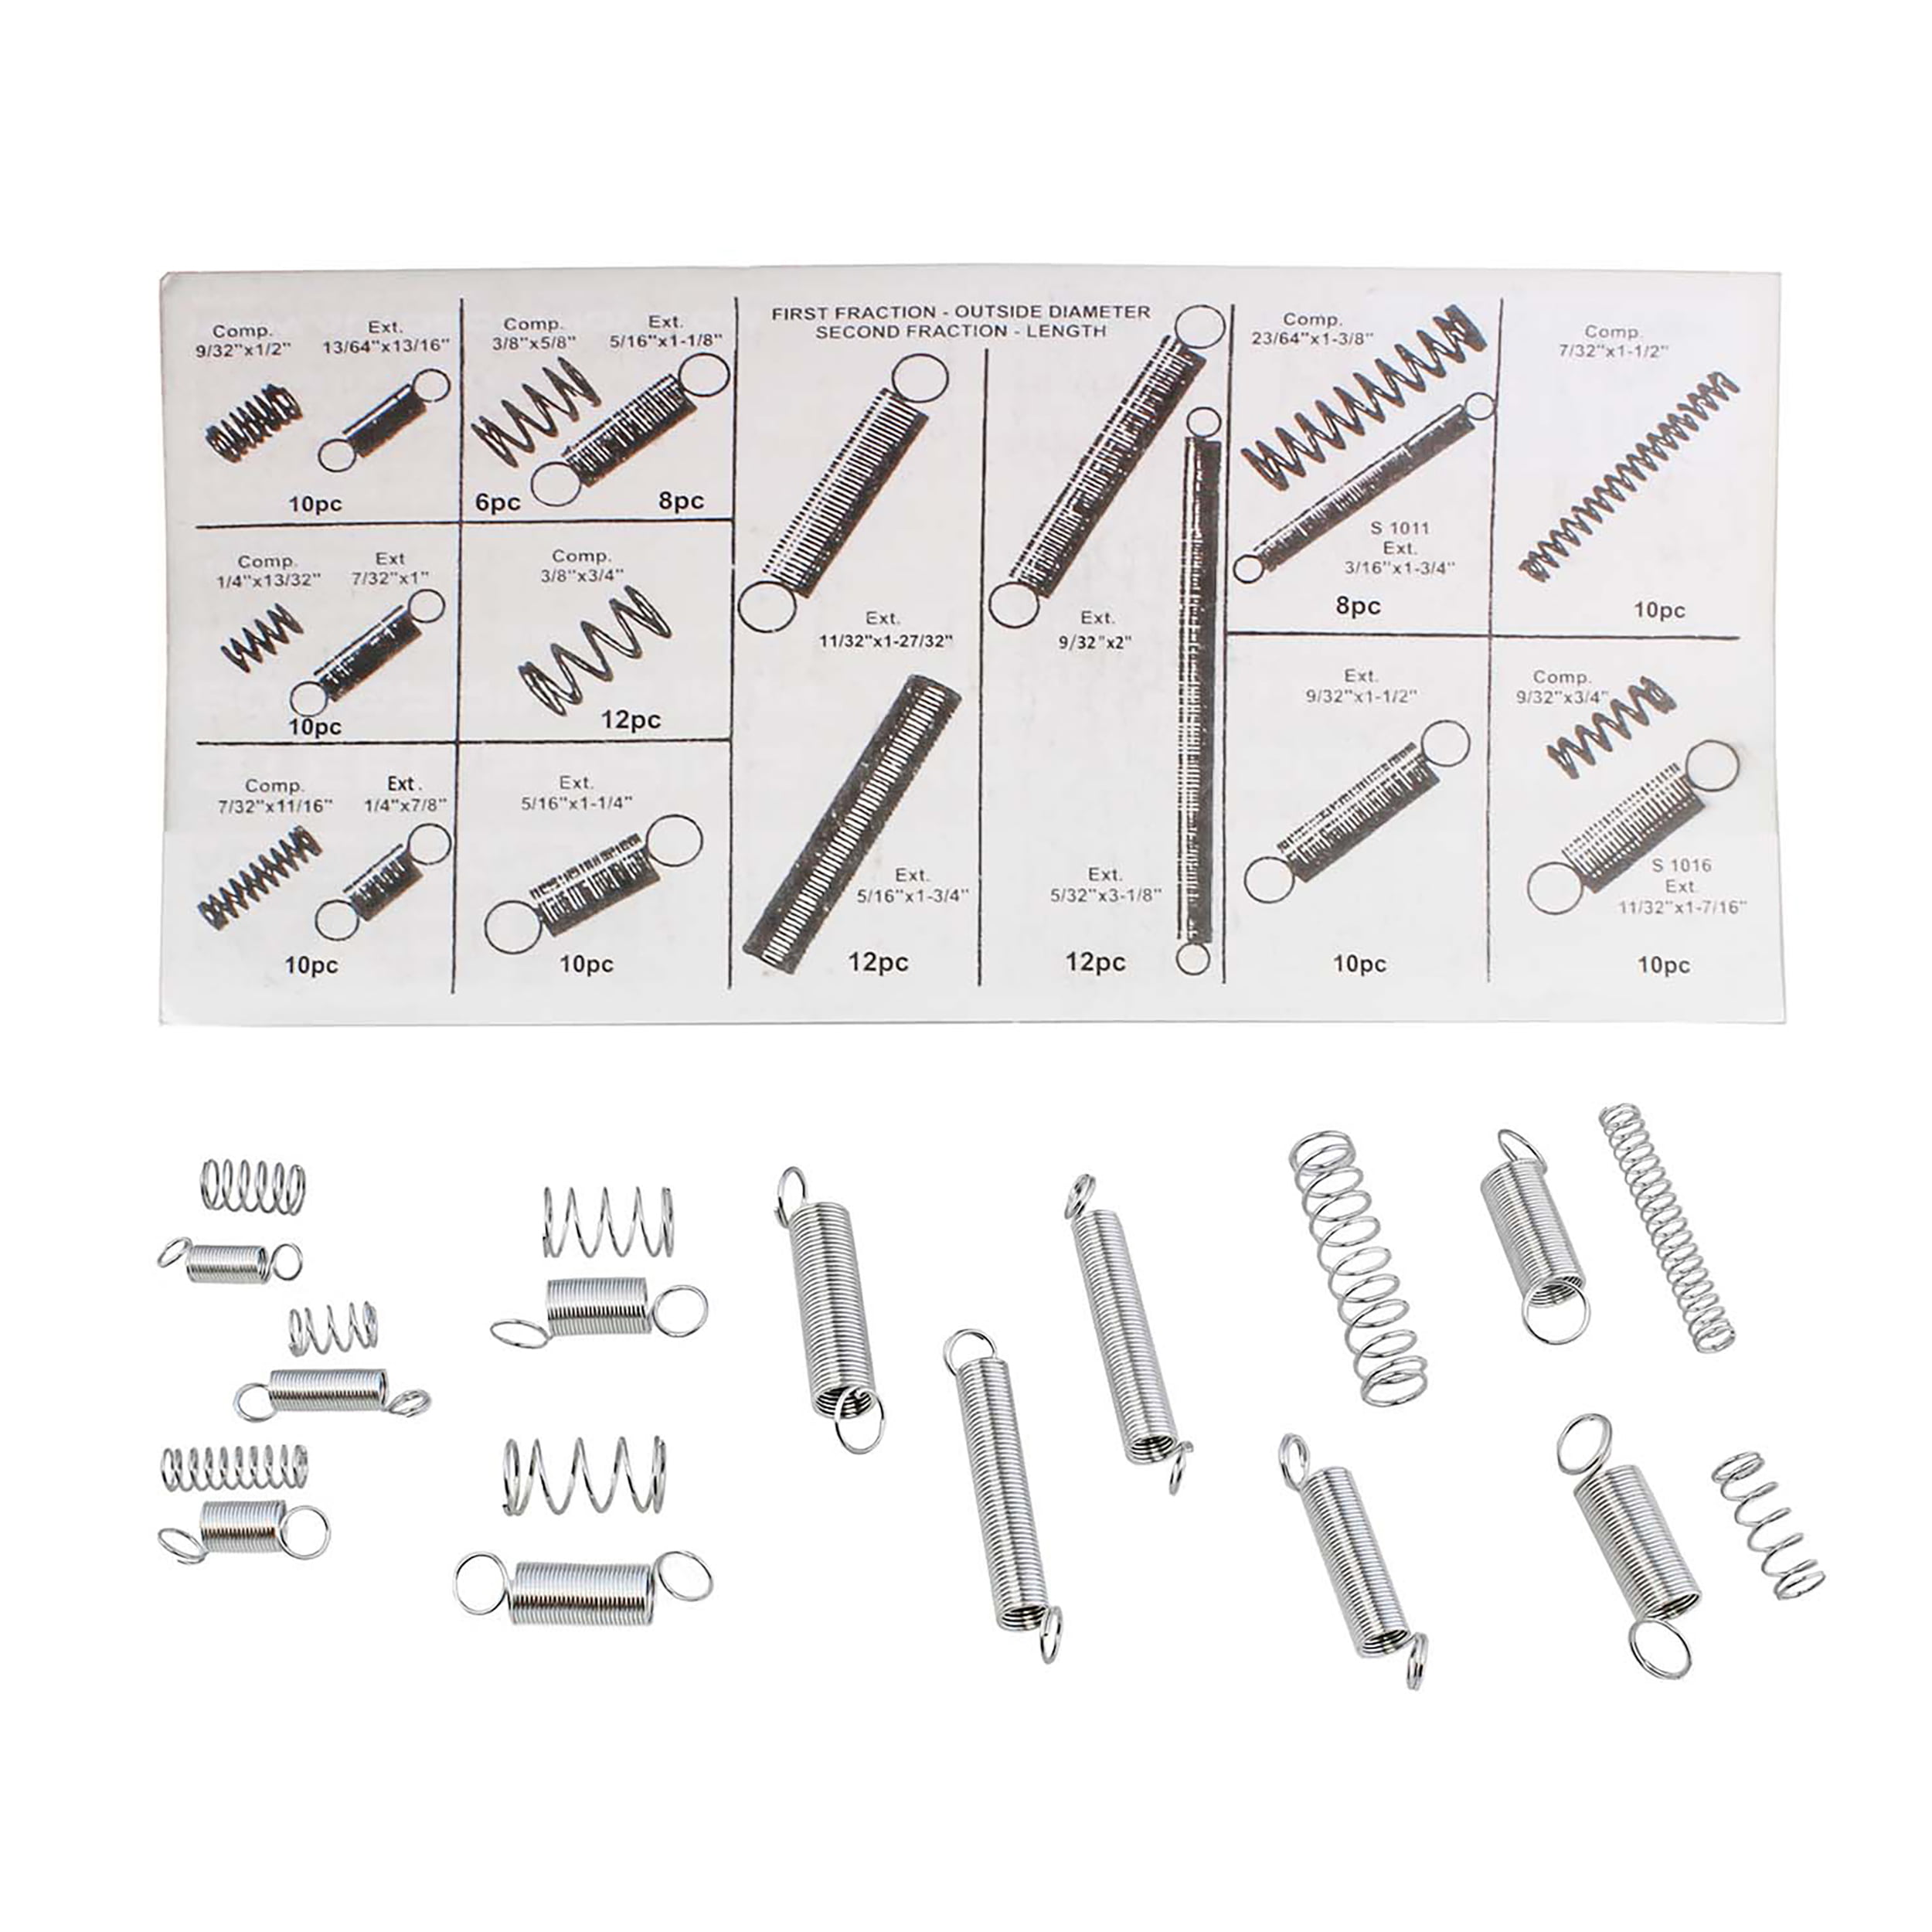 Metal Tension Springs Replacement Kit ABN Compression & Extension Spring 200 pc Assortment Set Heavy-Duty Steel Wire 